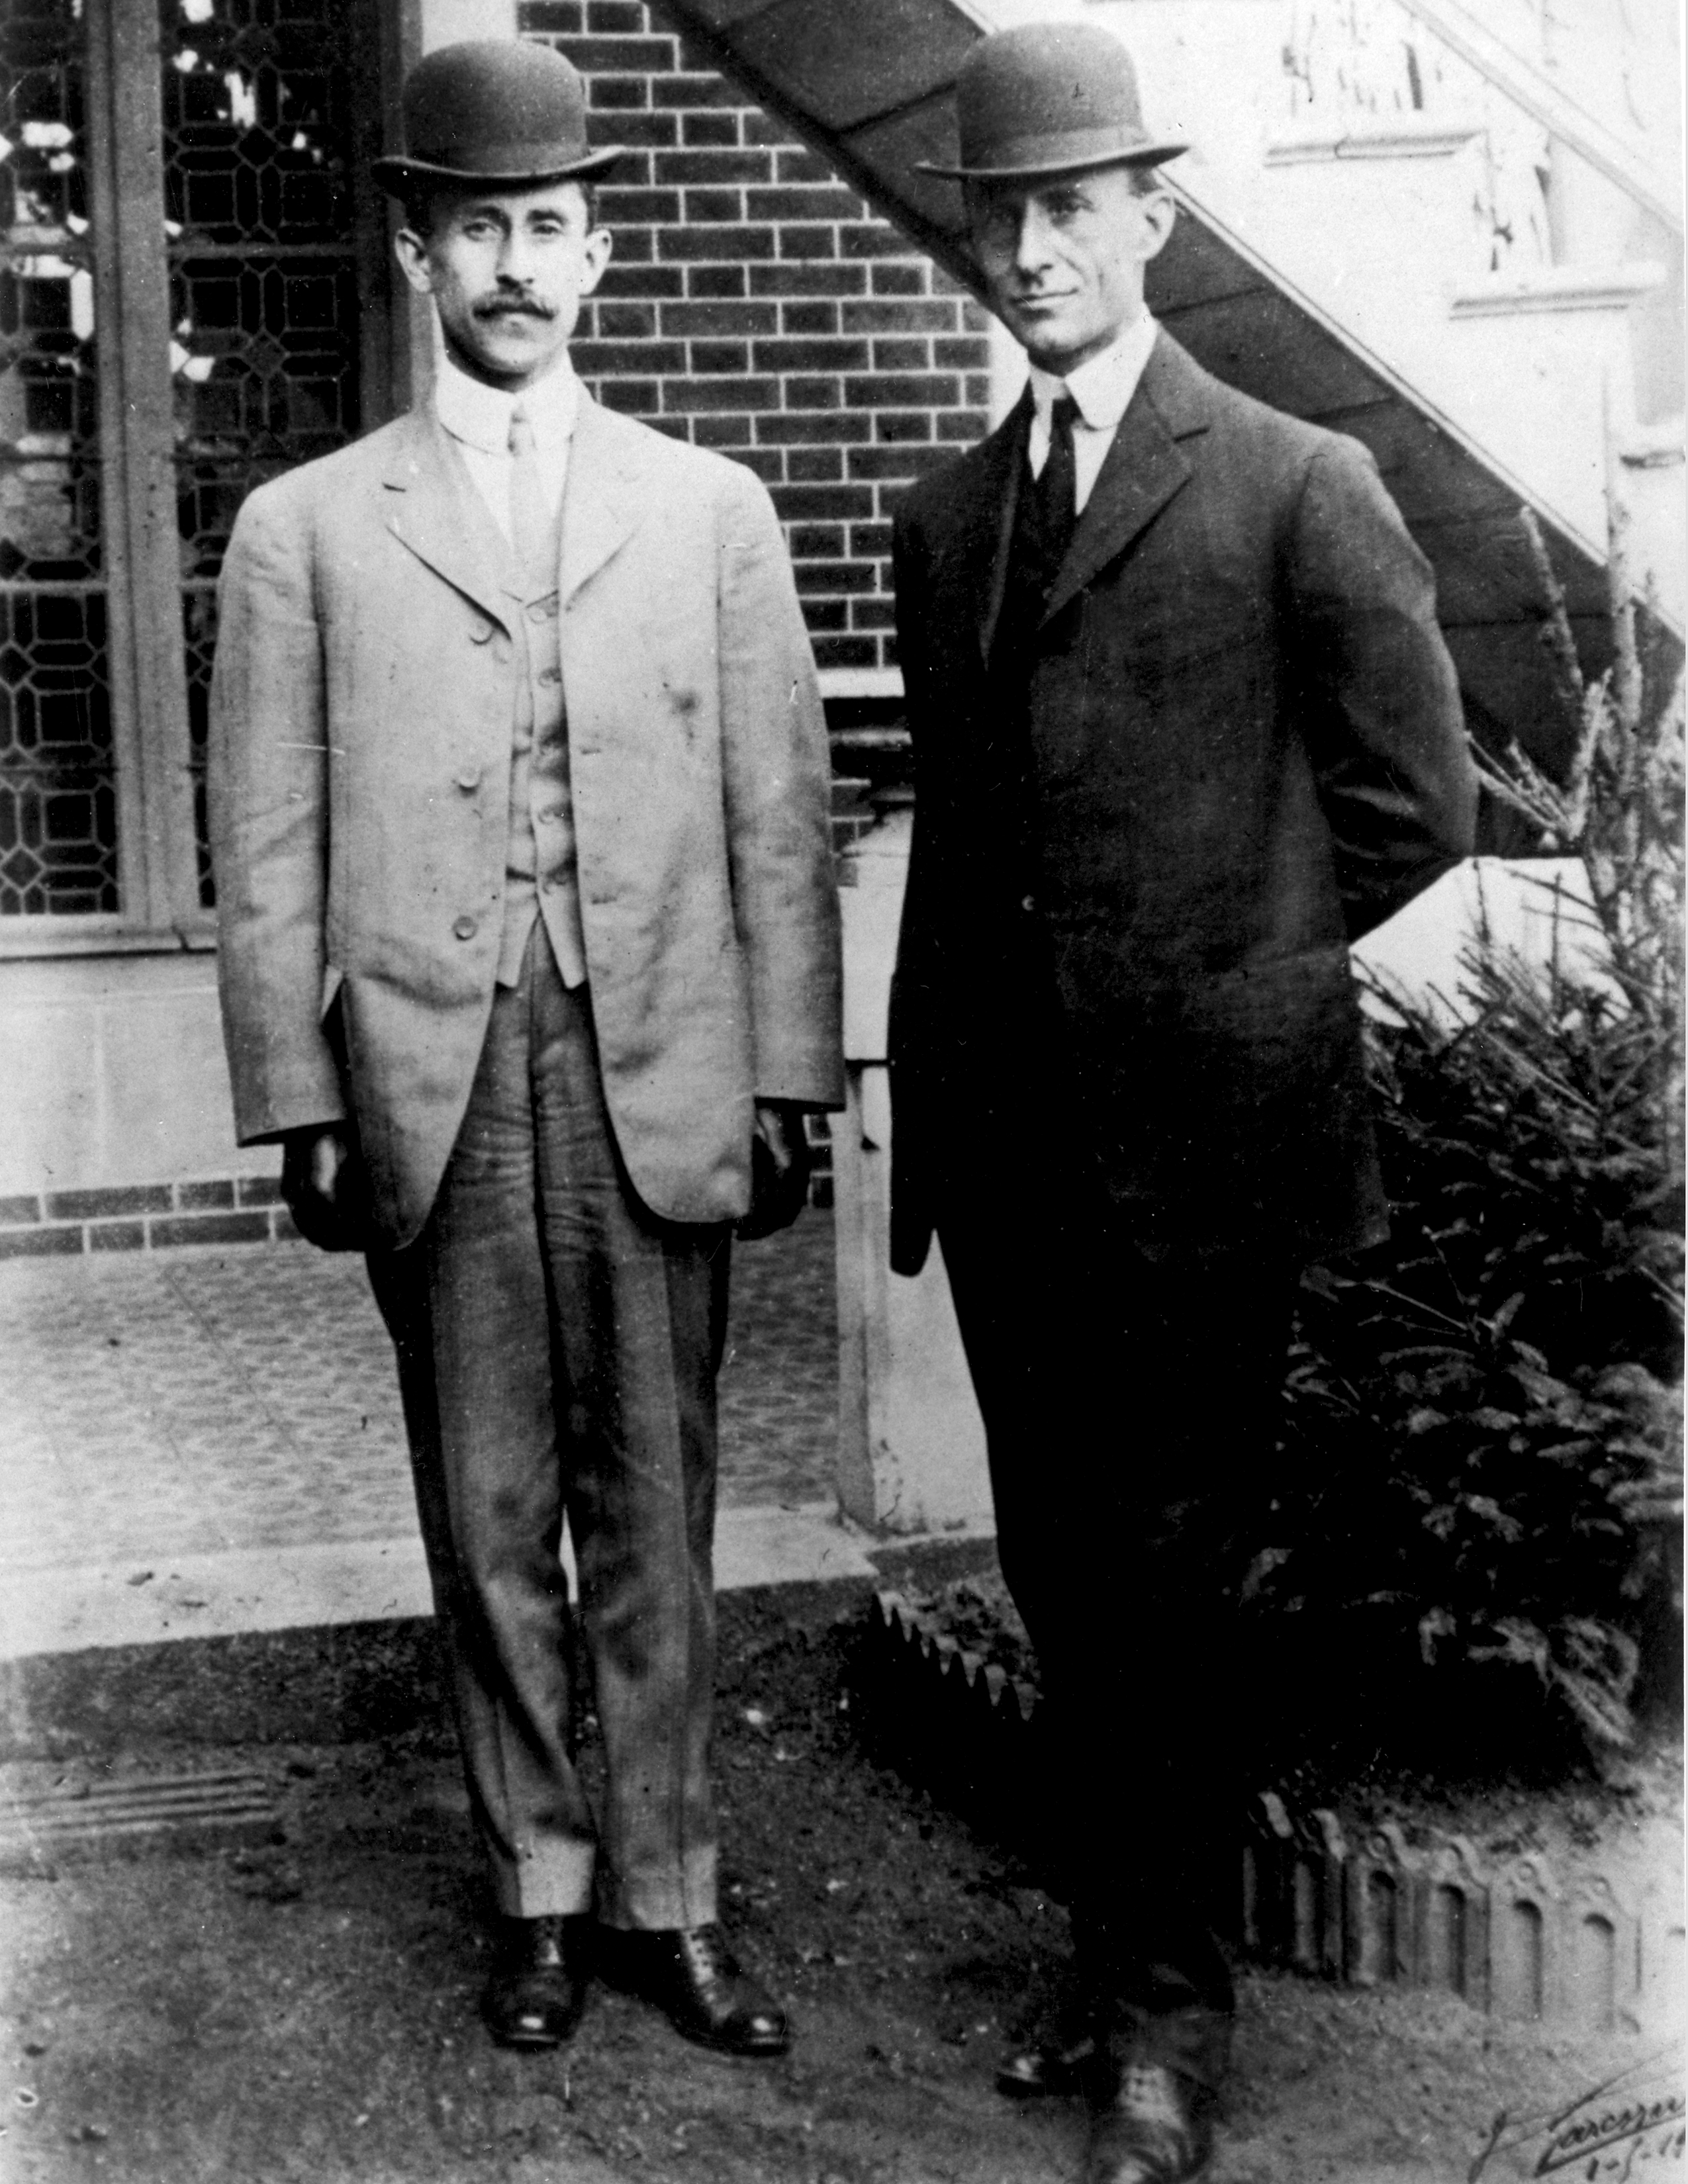 write a brief biography of orville and wilbur wright